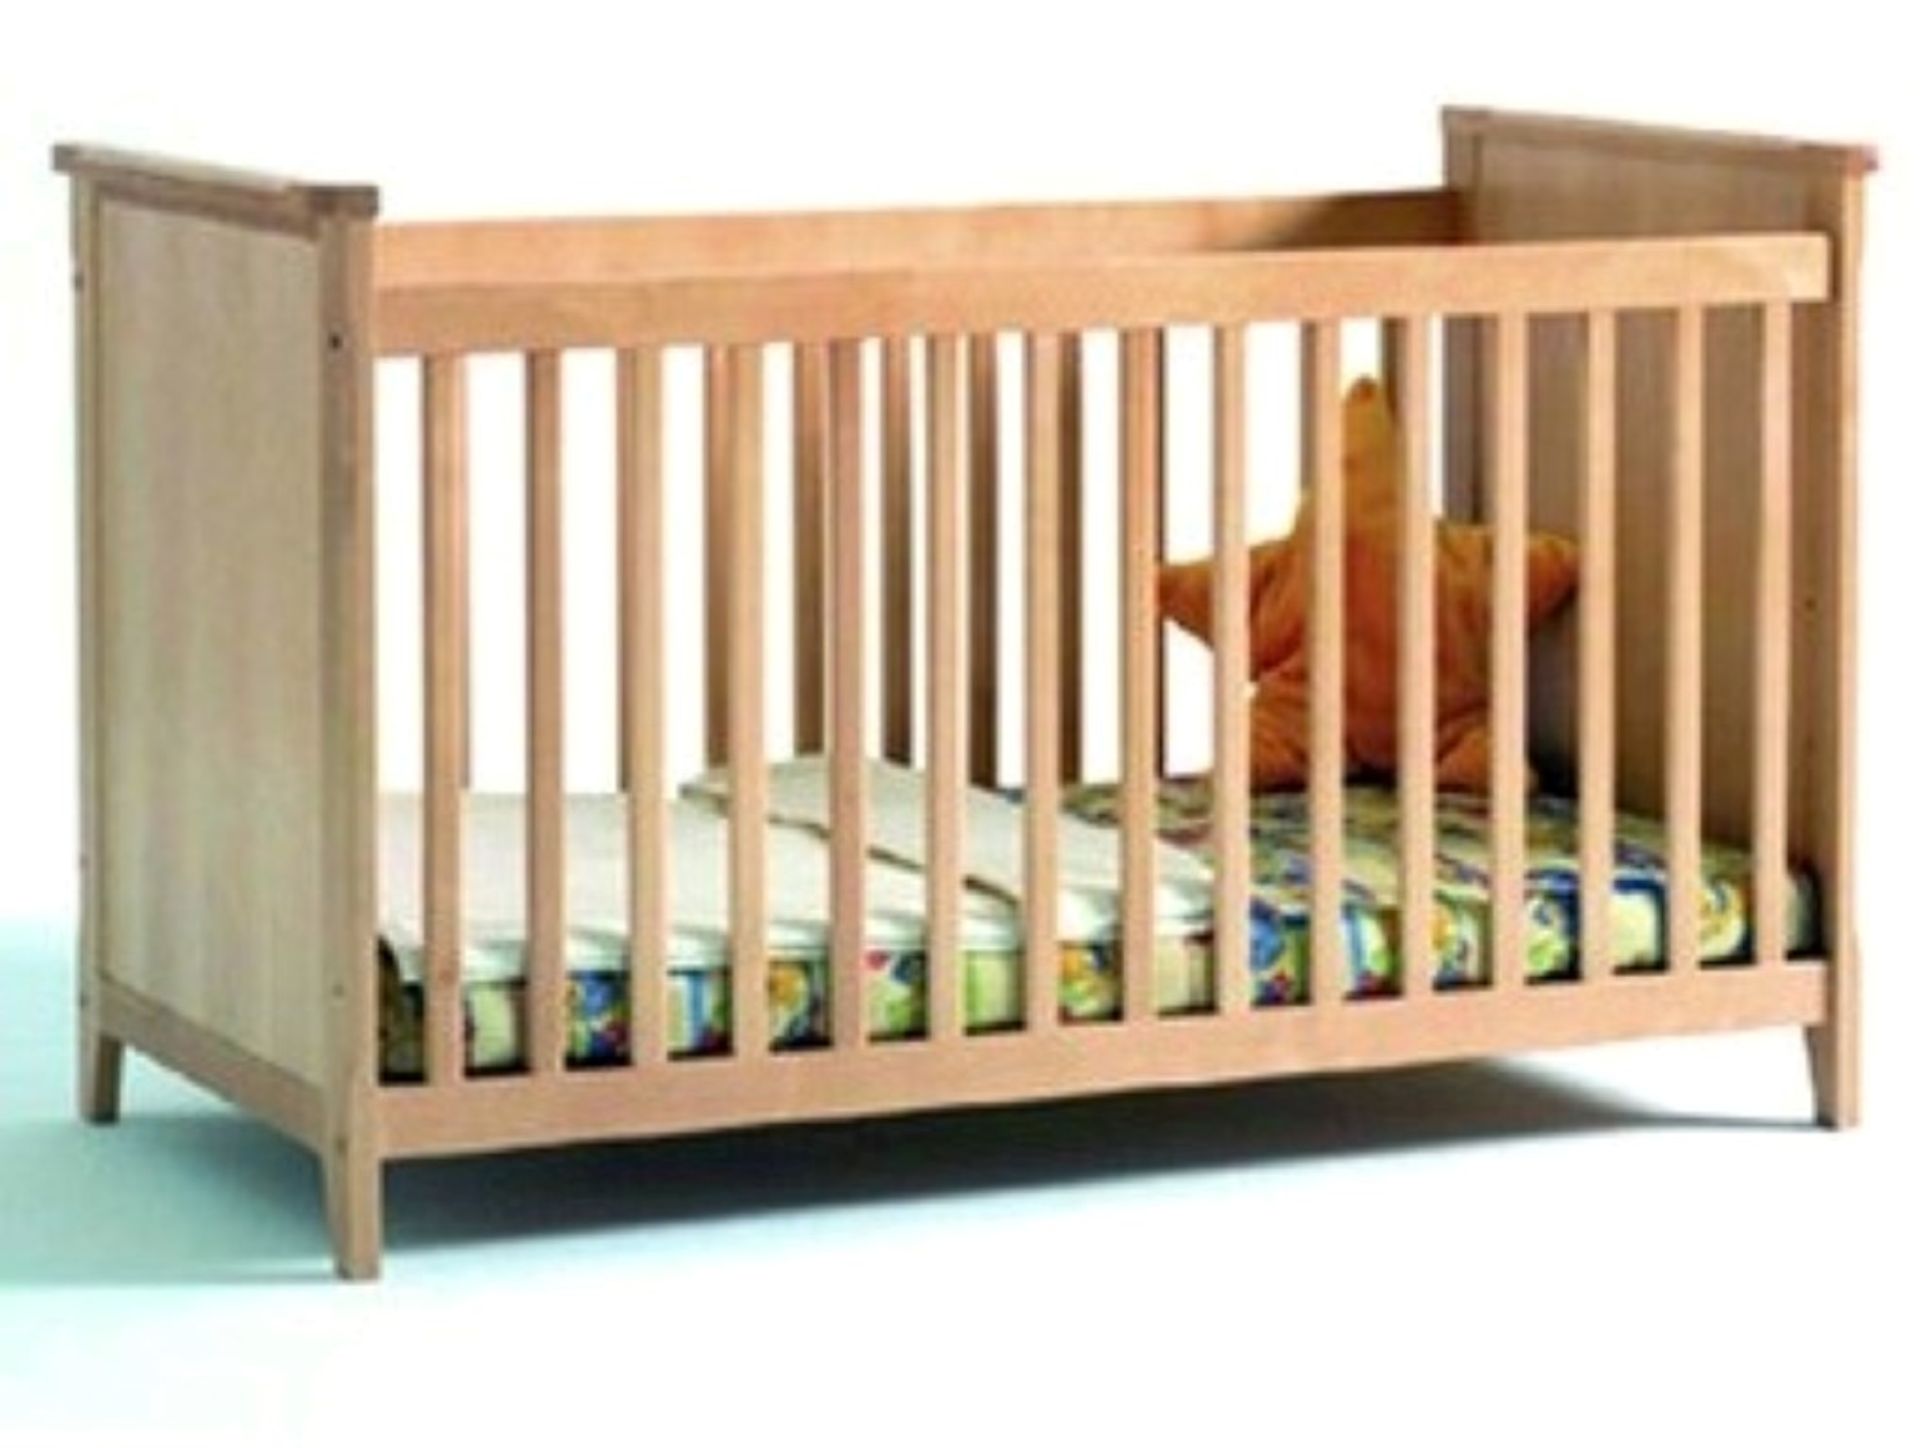 1 x Vienna Solid Wood Nursery Furniture Set - Birch - Includes Baby Changing Unit & Cot Brand - Image 3 of 4